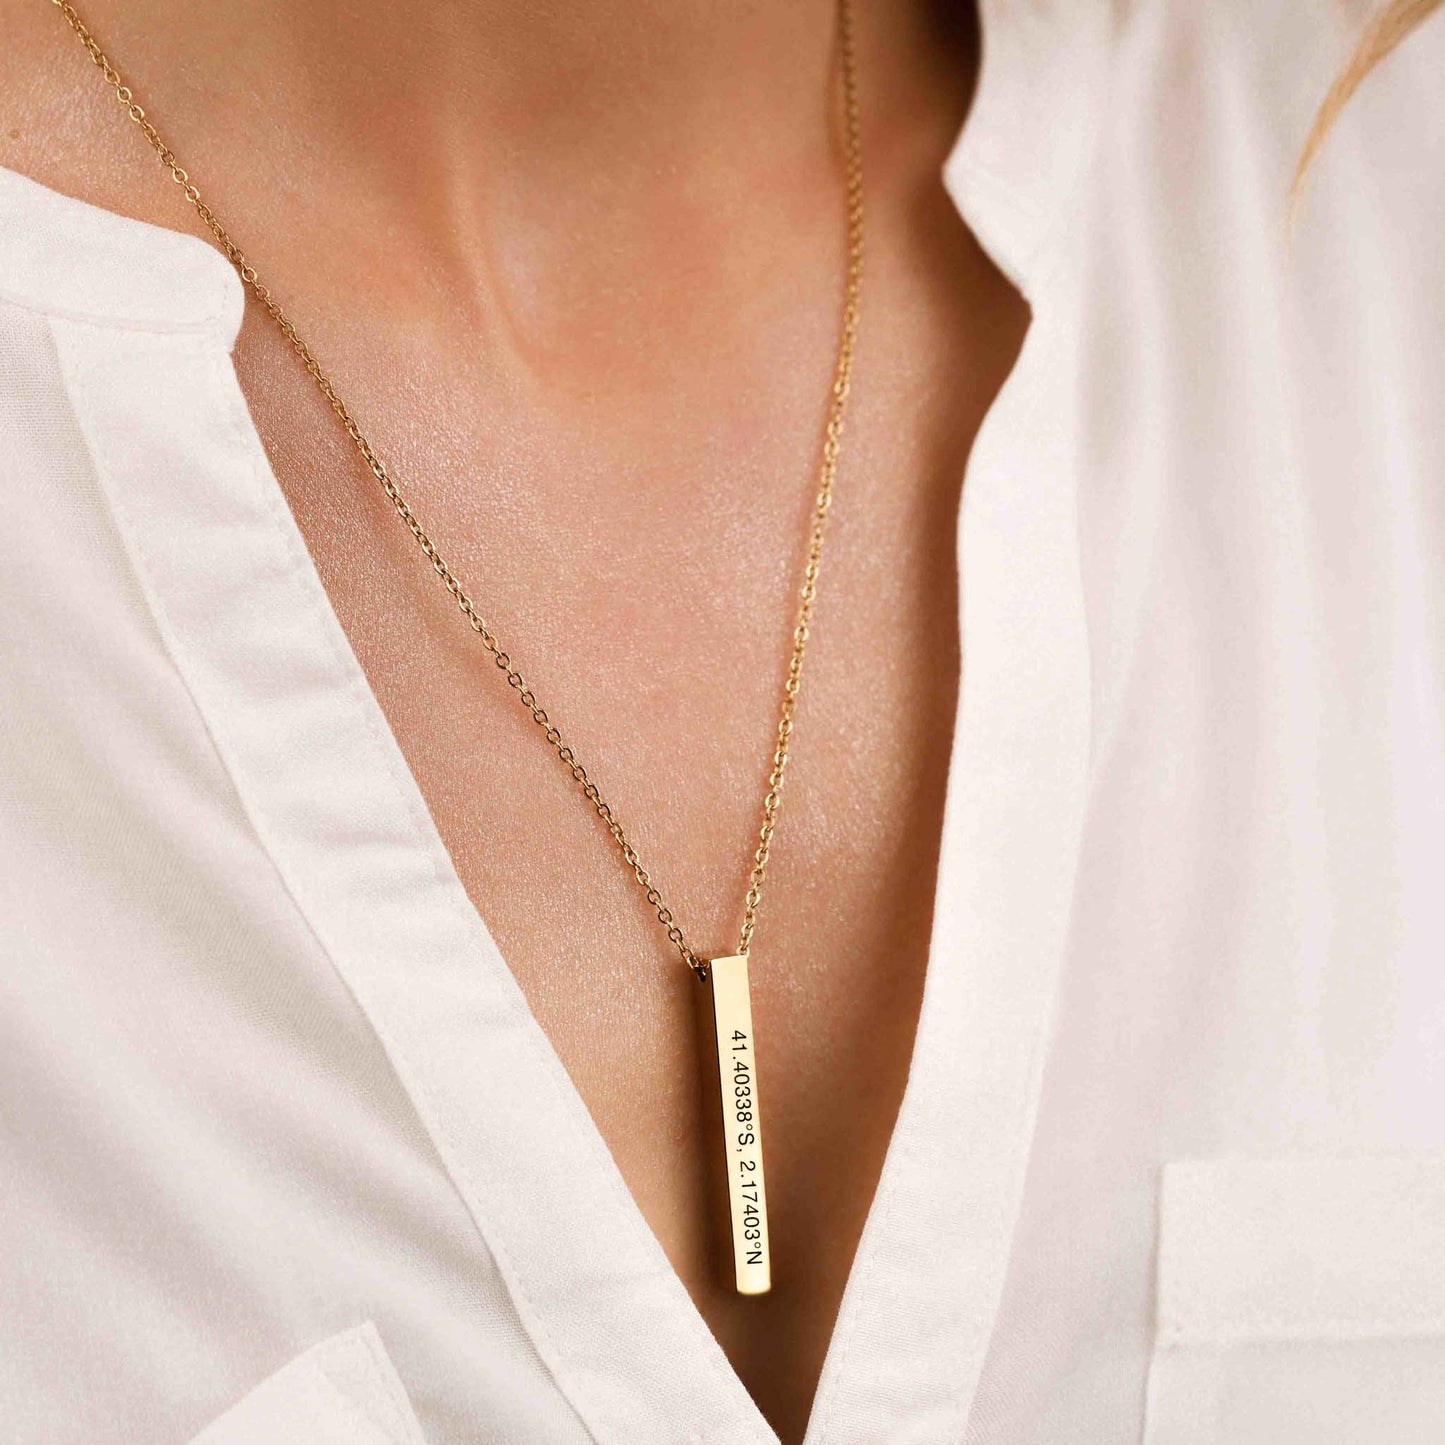 PERSONALIZED VERTICAL BAR NECKLACE